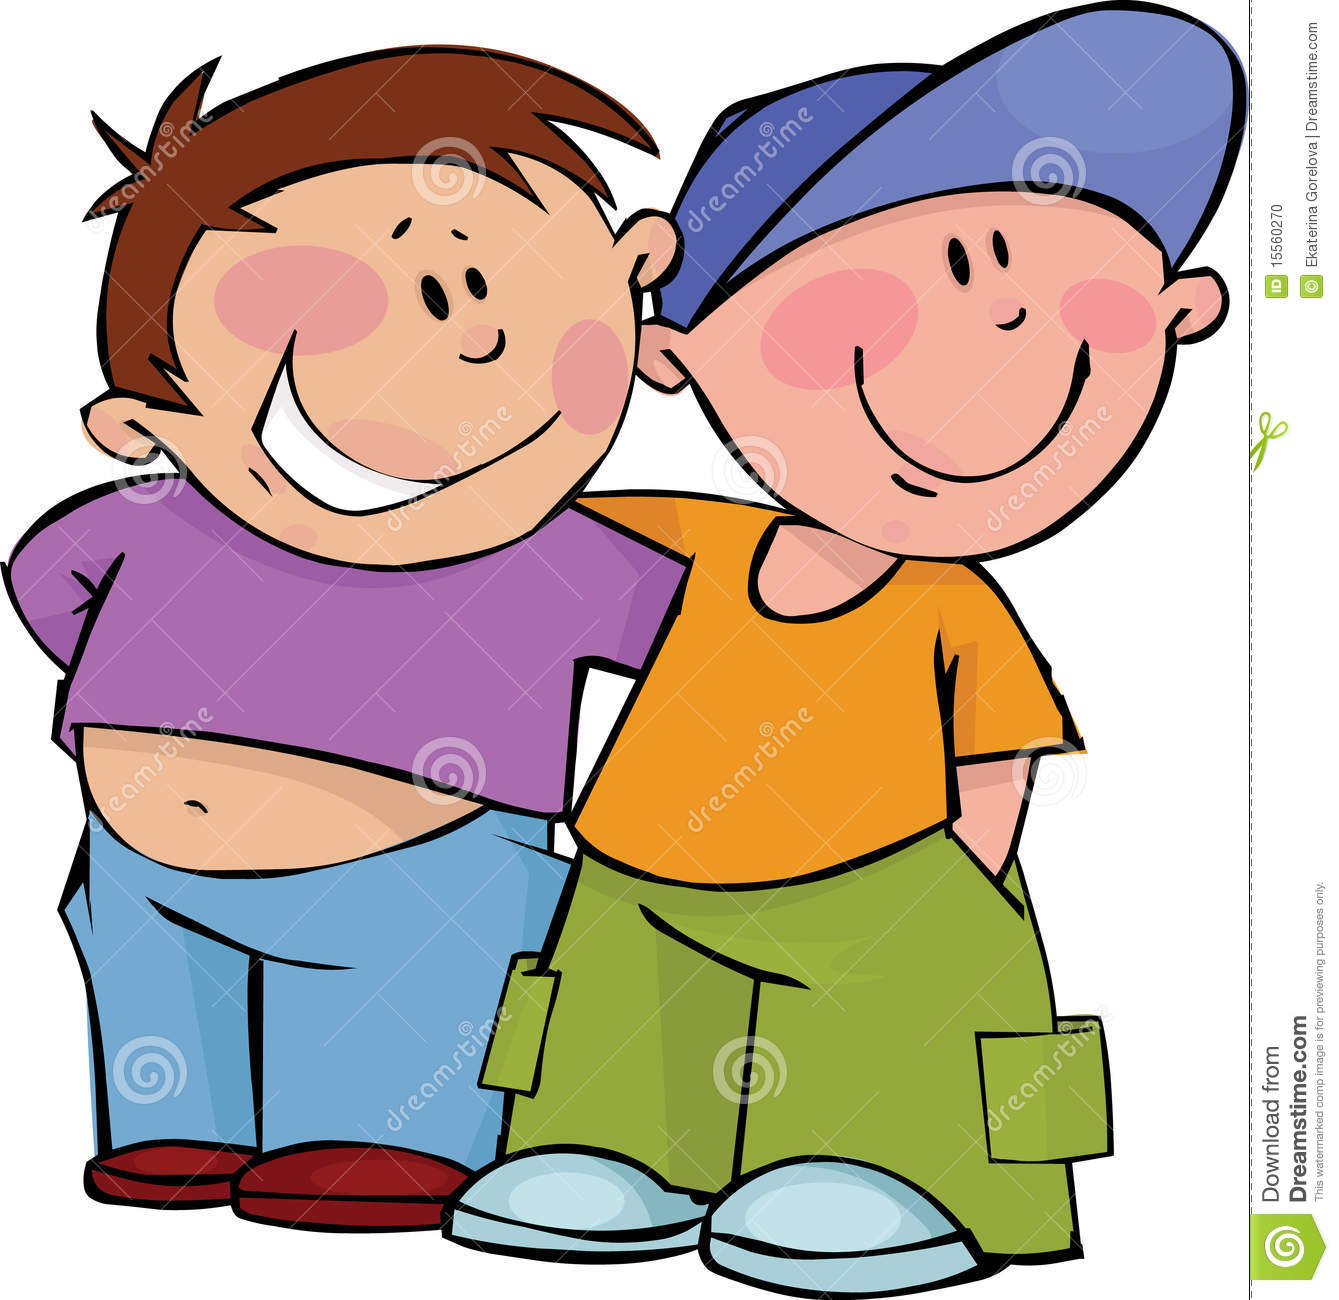 Hugging clipart friendly hug. Group friends two funny